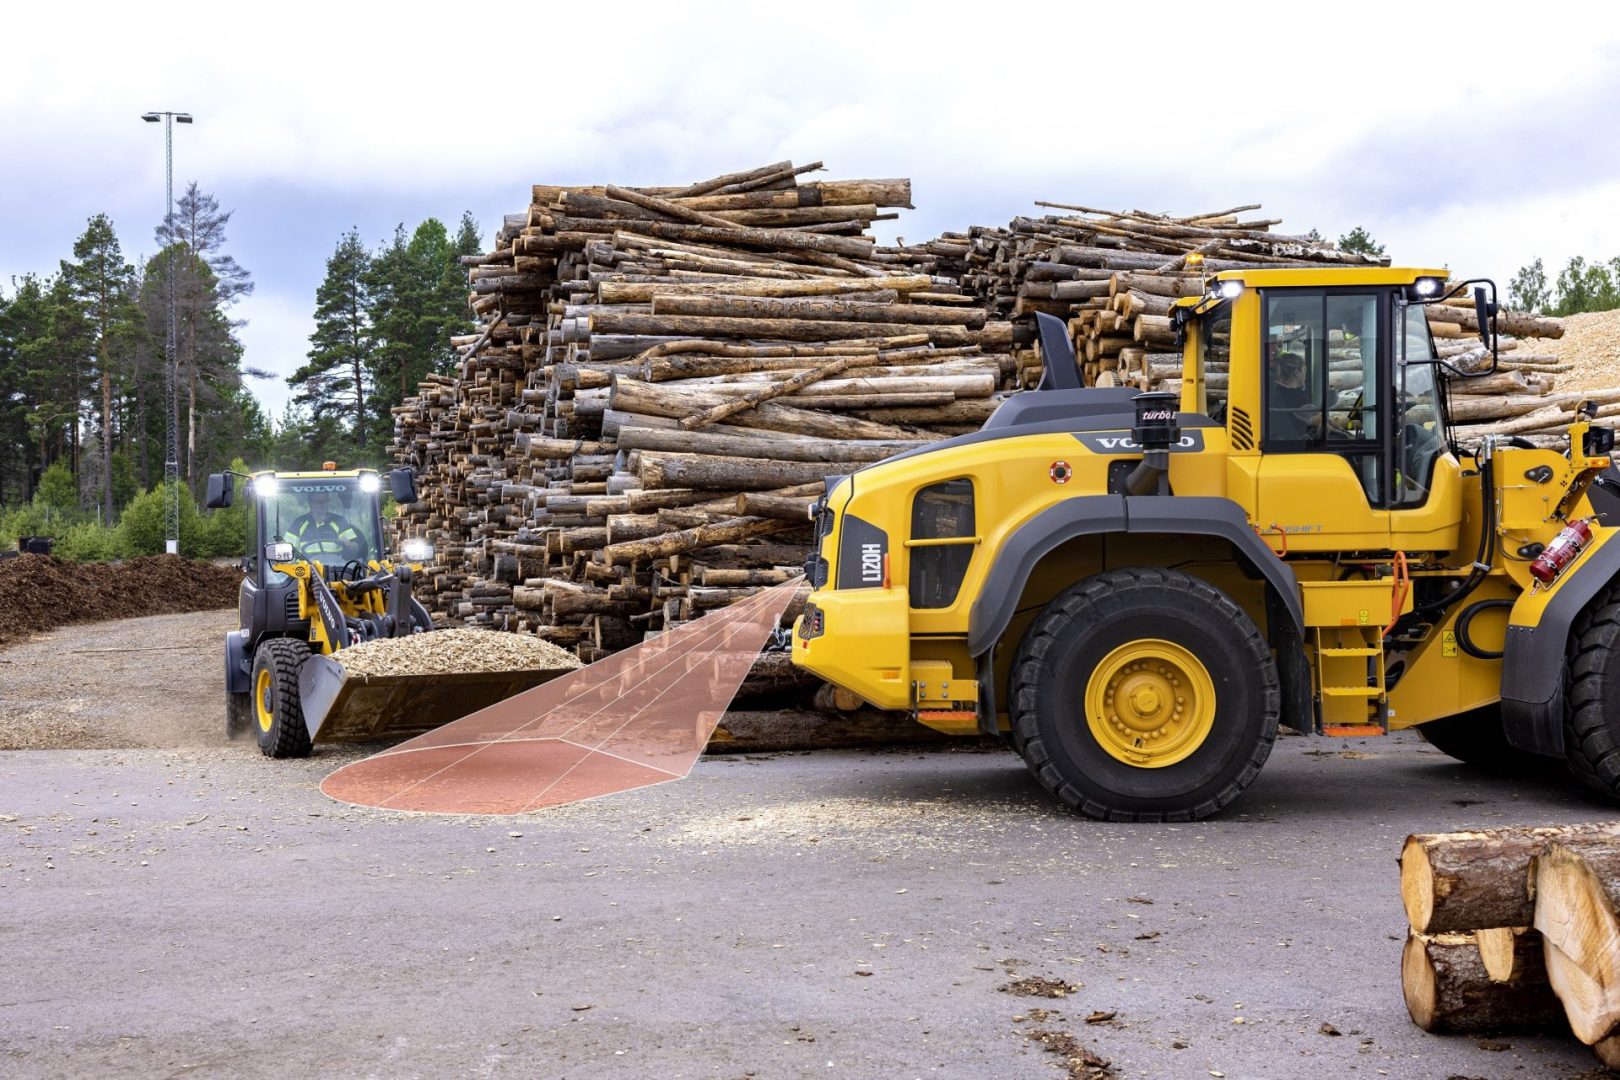 Volvo CE introduces automatic braking feature for wheel loaders